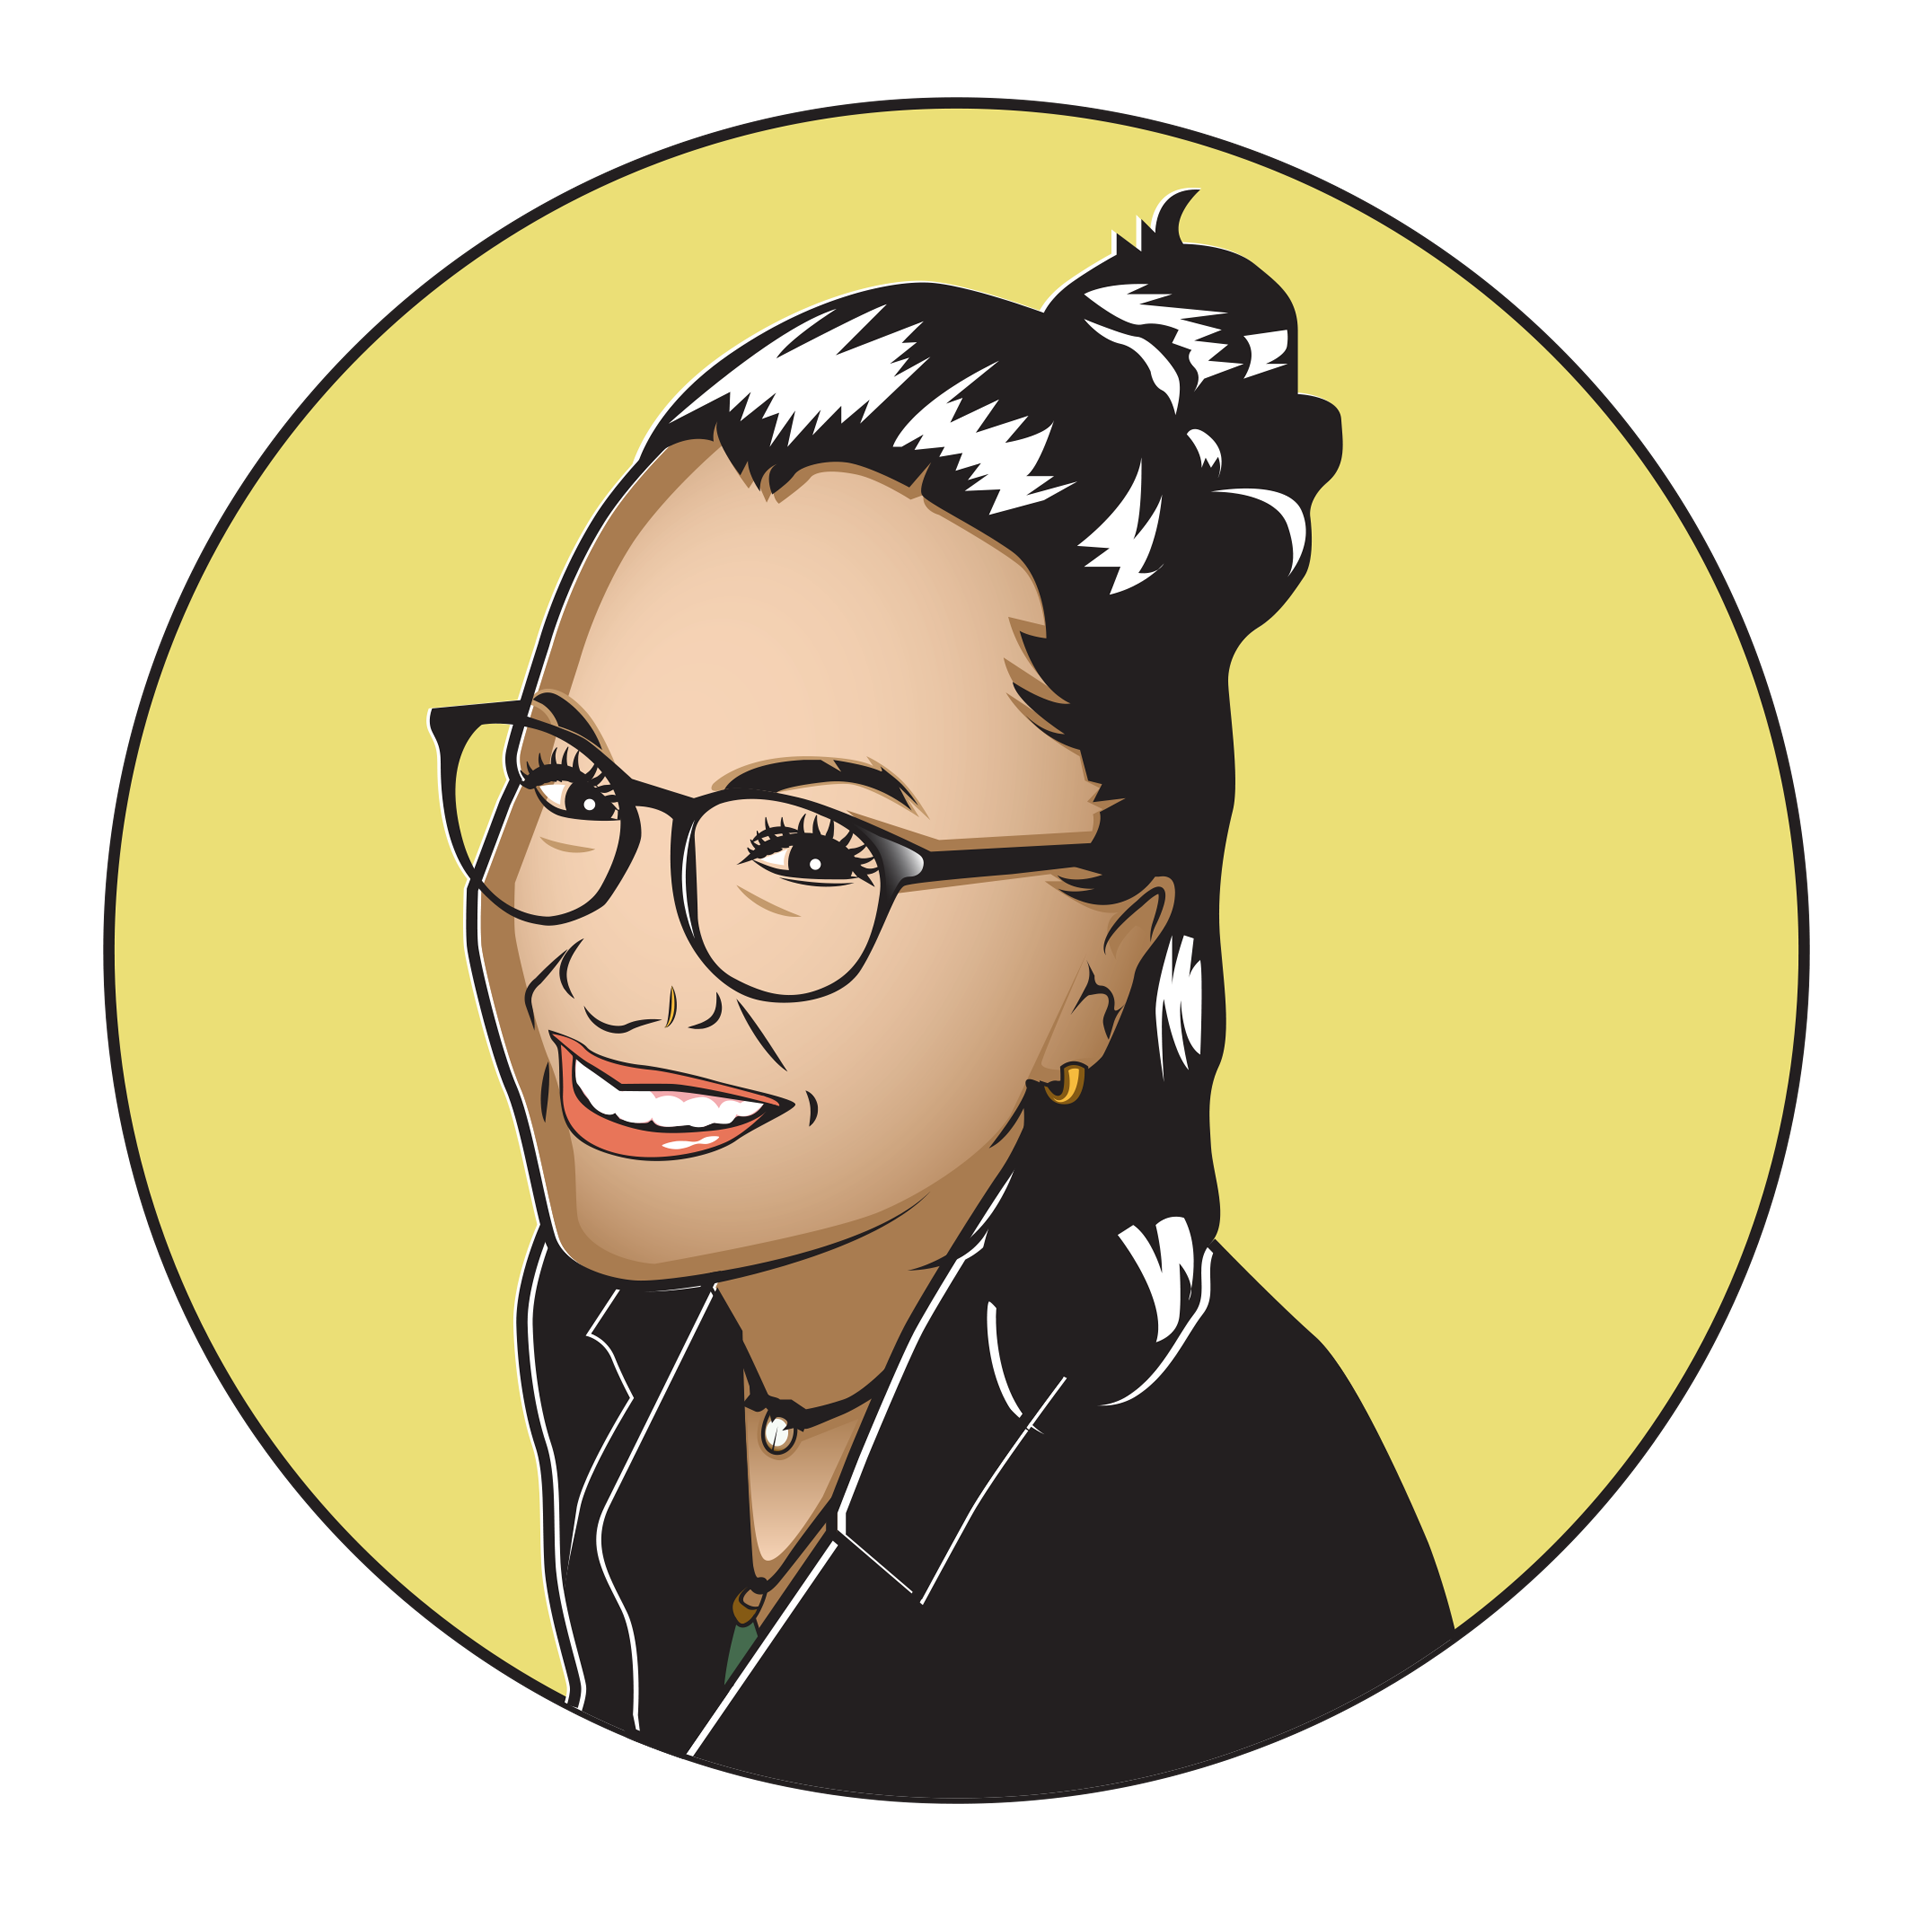 Illustrated image of Jo, a Filipino person with black hair. They are wearing black rimmed glasses, a black t-shirt, and a black pearl necklace. Their image is on a yellow background.